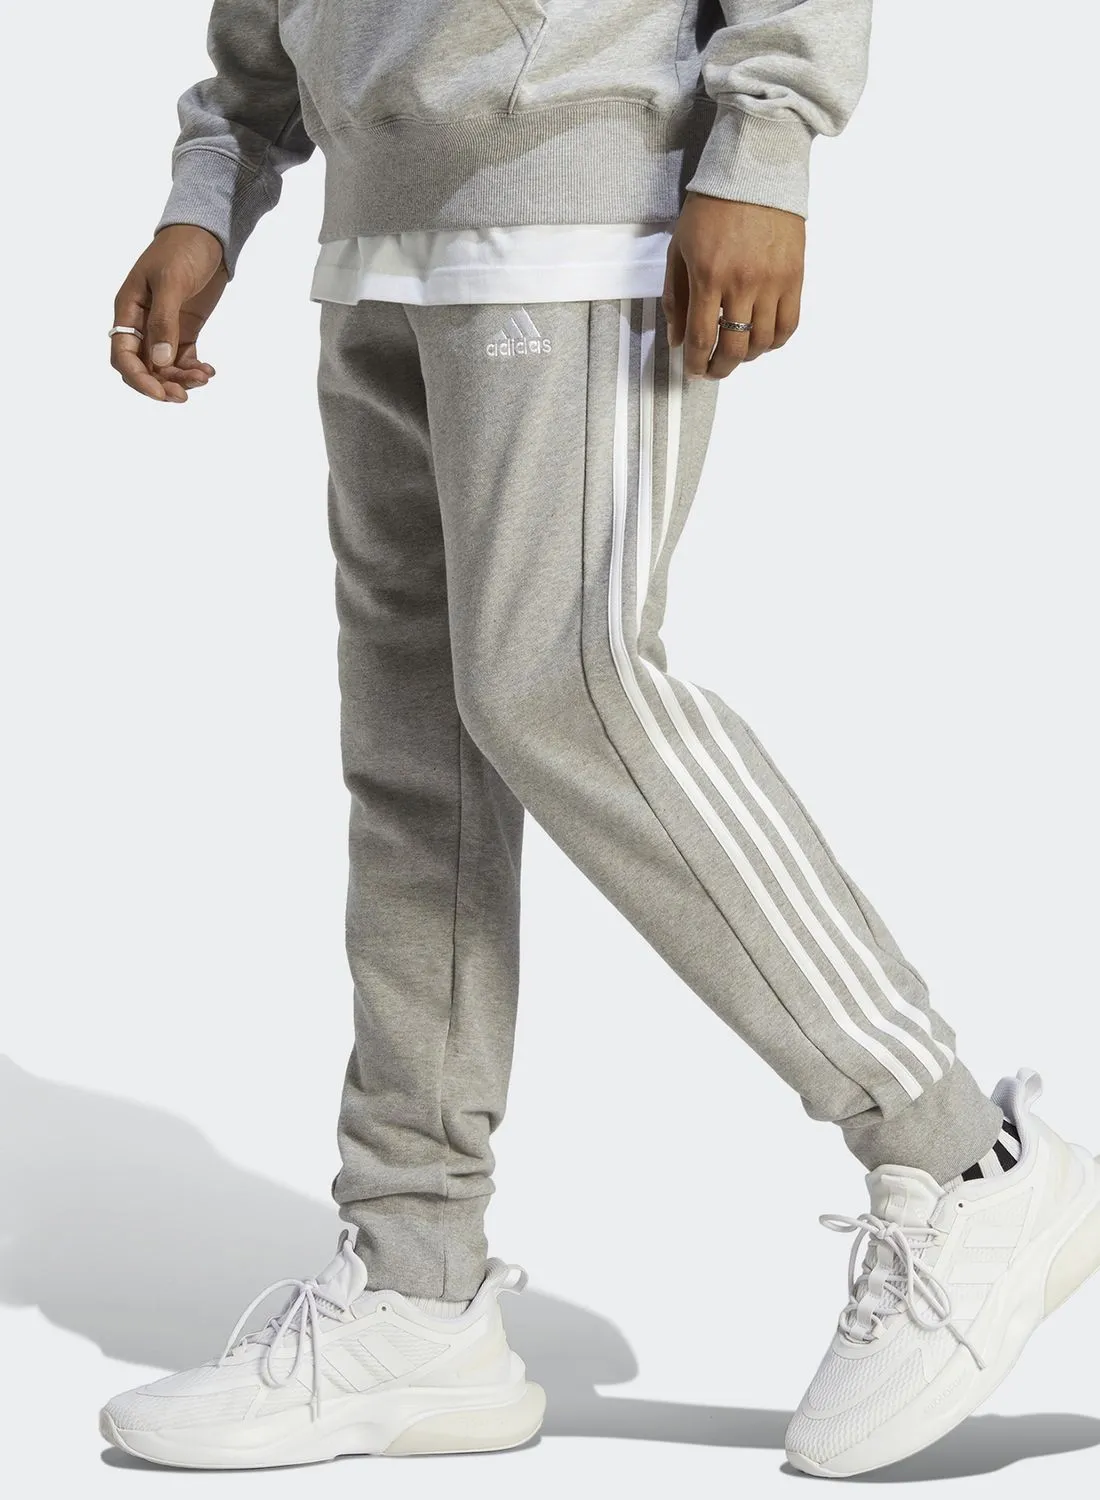 Adidas 3 Stripe Essential French Terry Sweatpants